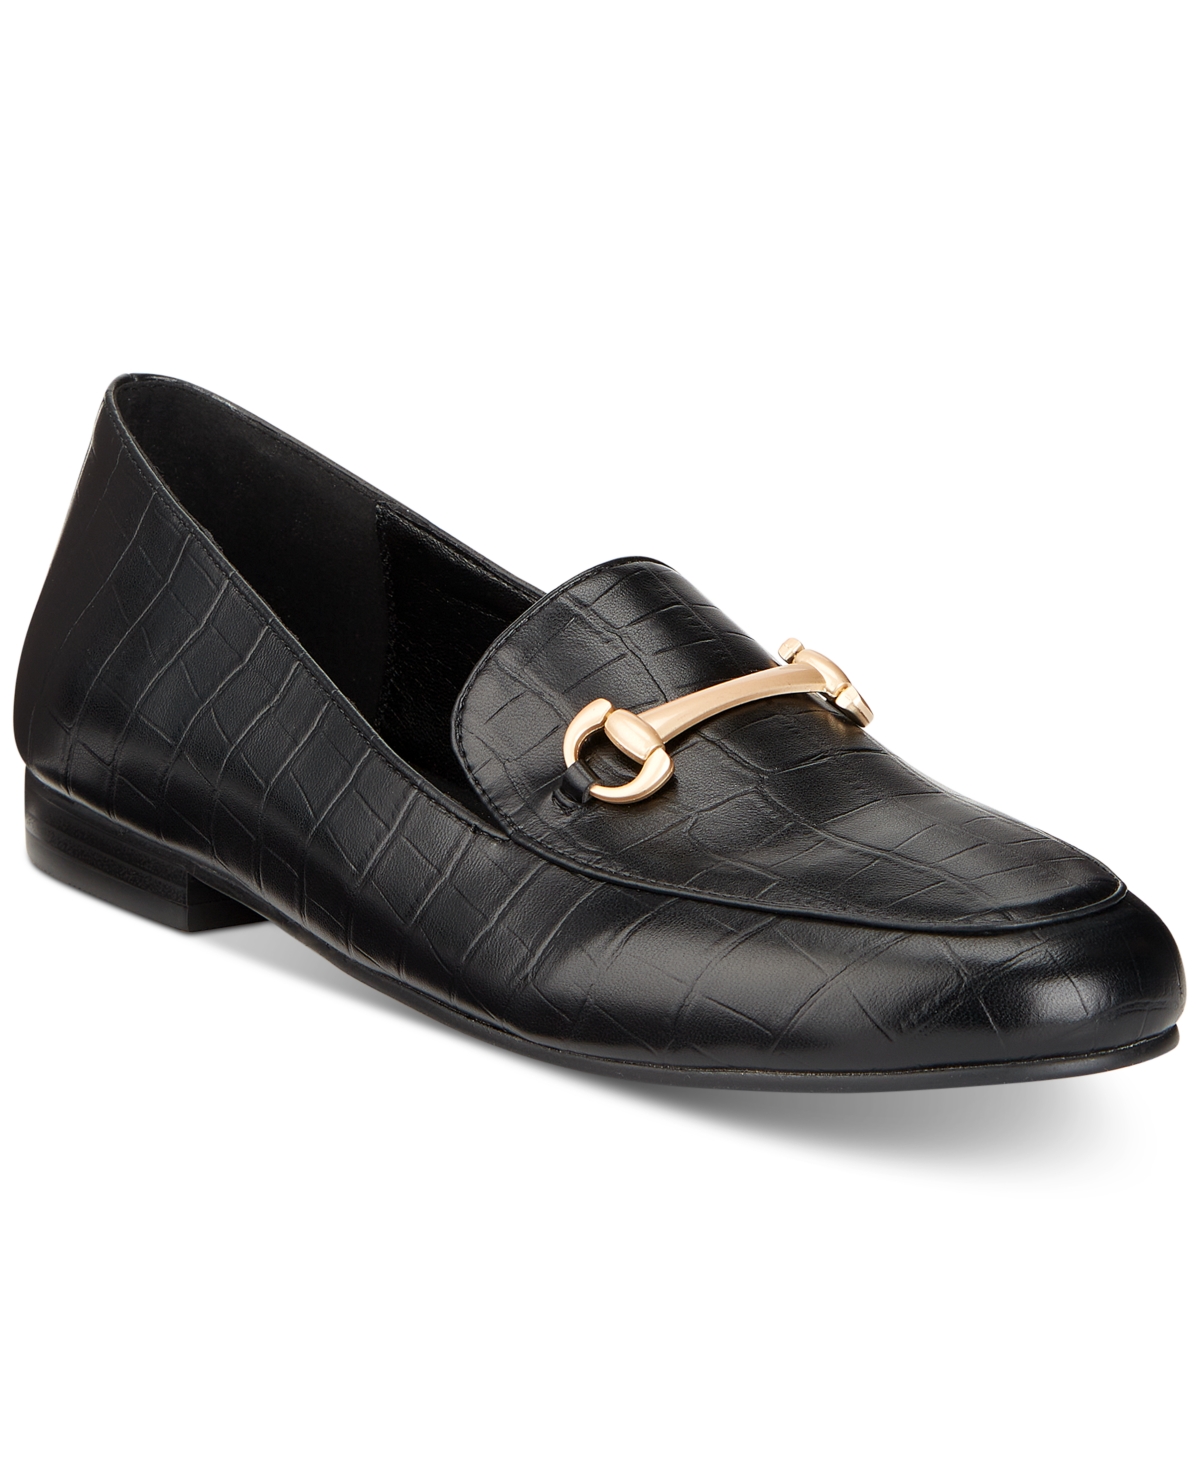 Vaila Shoes Women's Reese Slip-on Hardware Classic Loafer Flats-extended Sizes 9-14 In Black